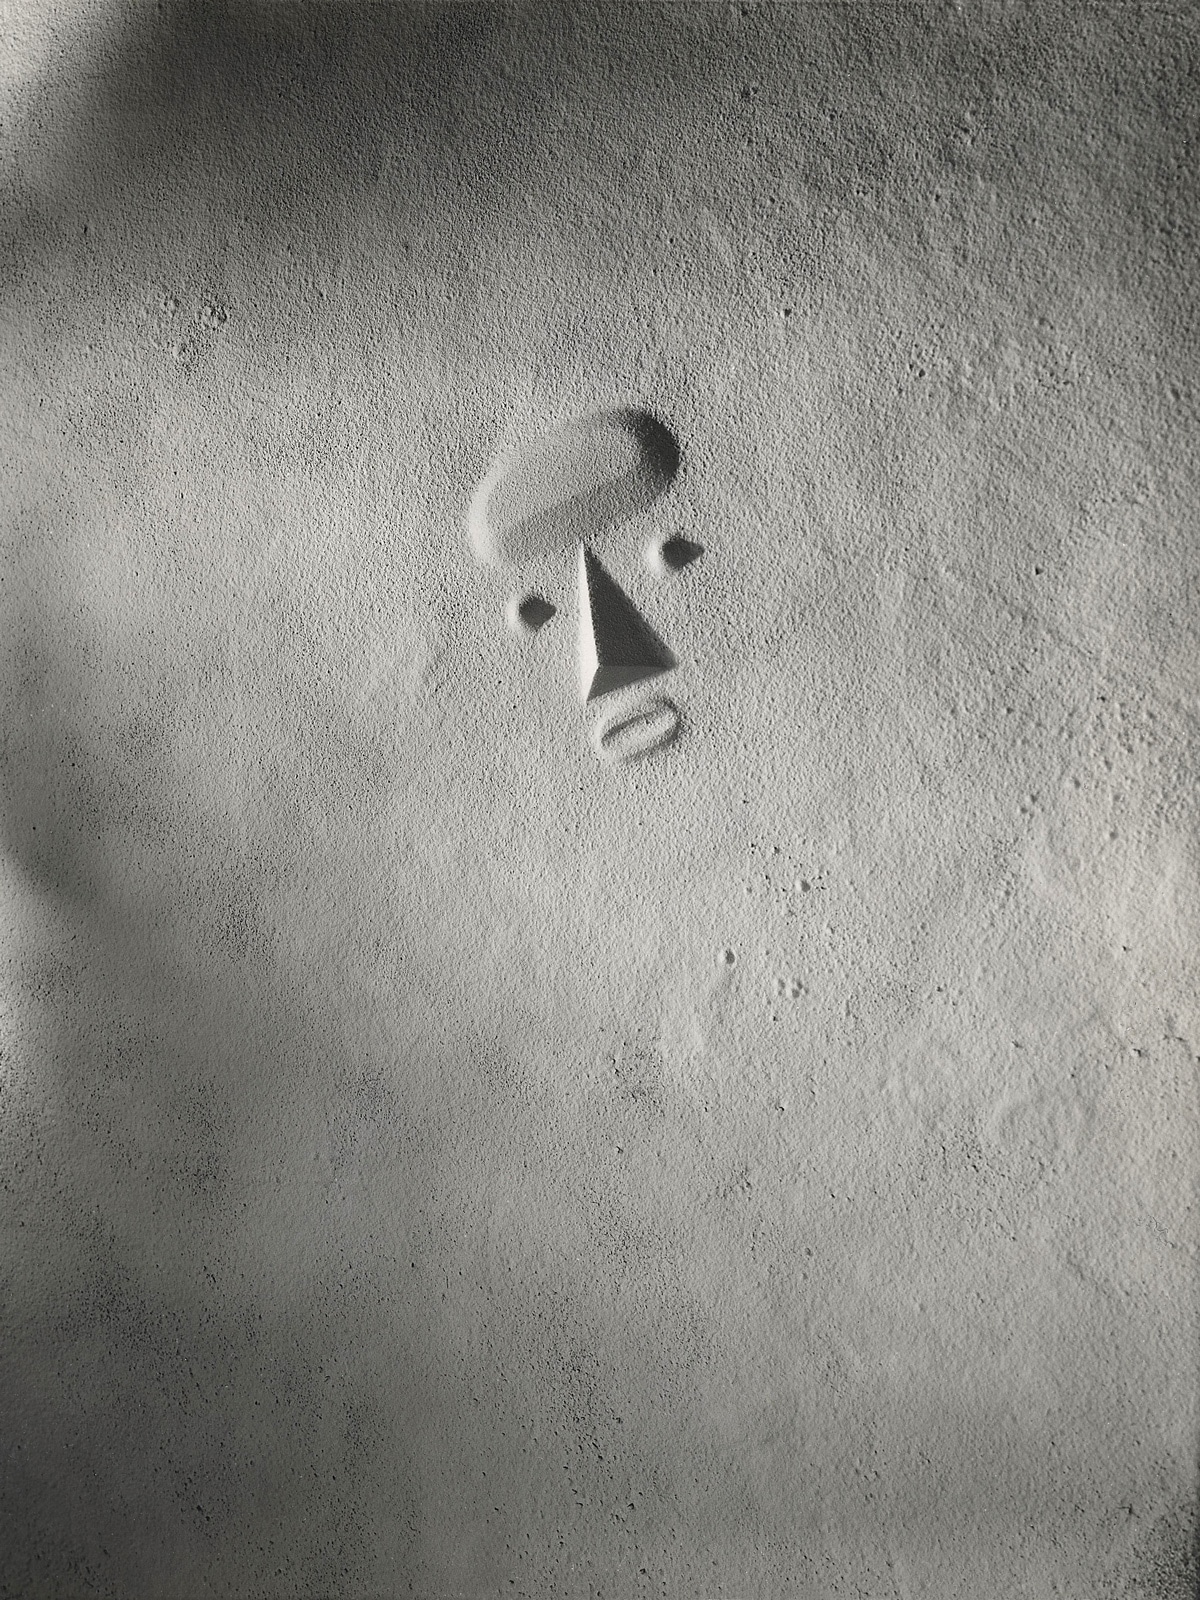 A model in sand of Isamu Noguchi's unrealized Sculpture to Be Seen From Mars